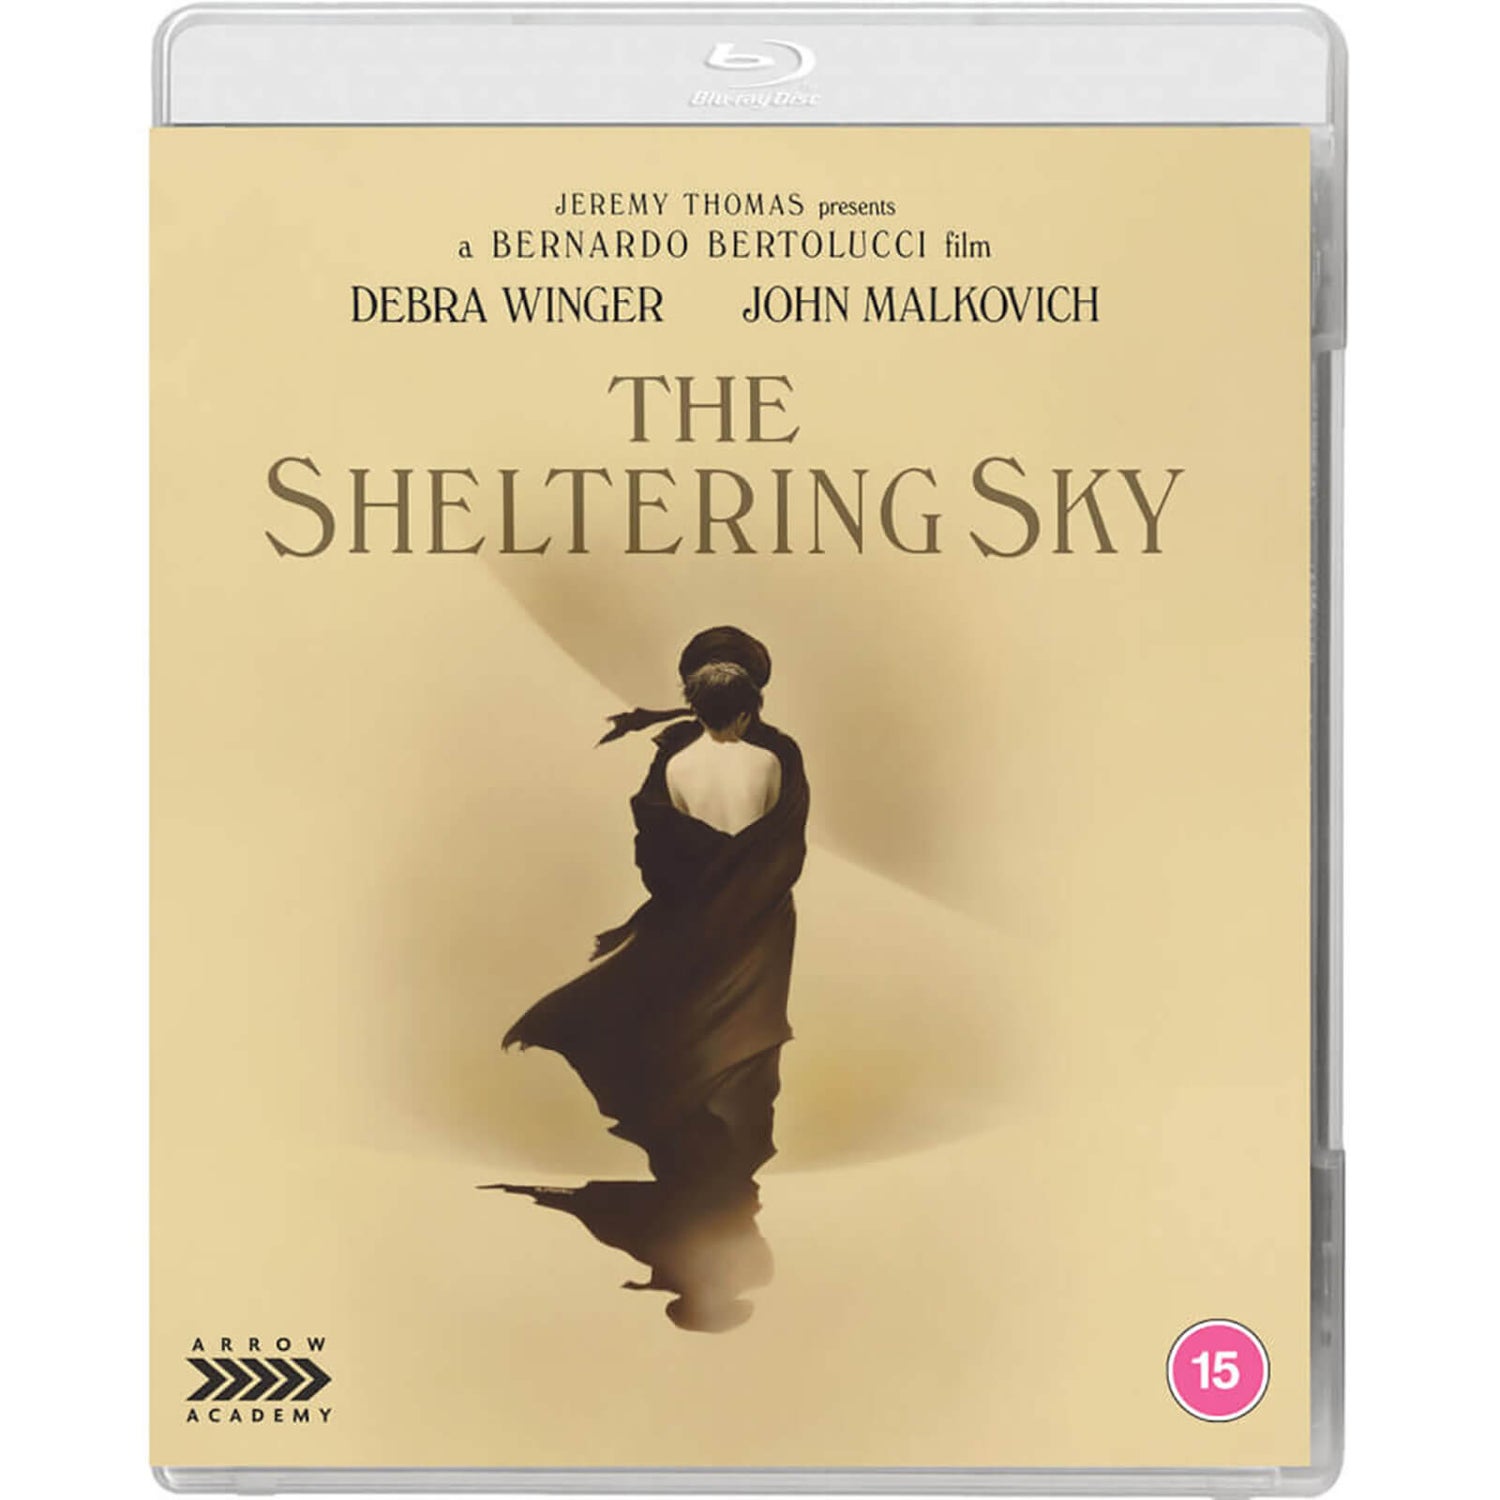 The Sheltering Sky Blu-ray